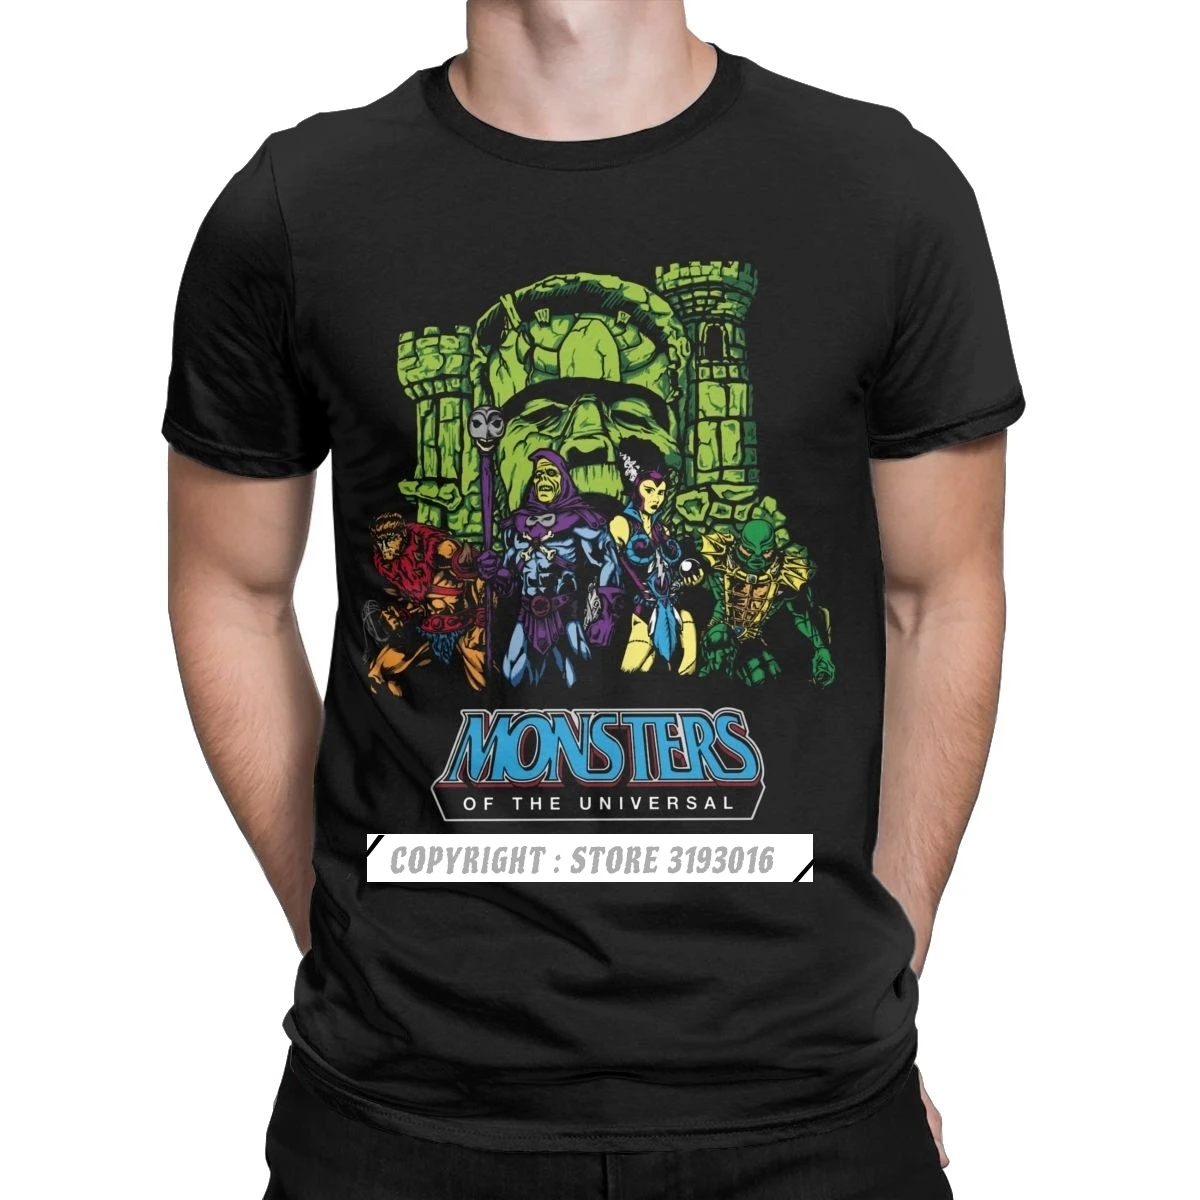 

Monsters Of The Universal He-Man Of The Universe Men T Shirts Skeletor 80s She-Ra Beast Tee T Shirts Cotton